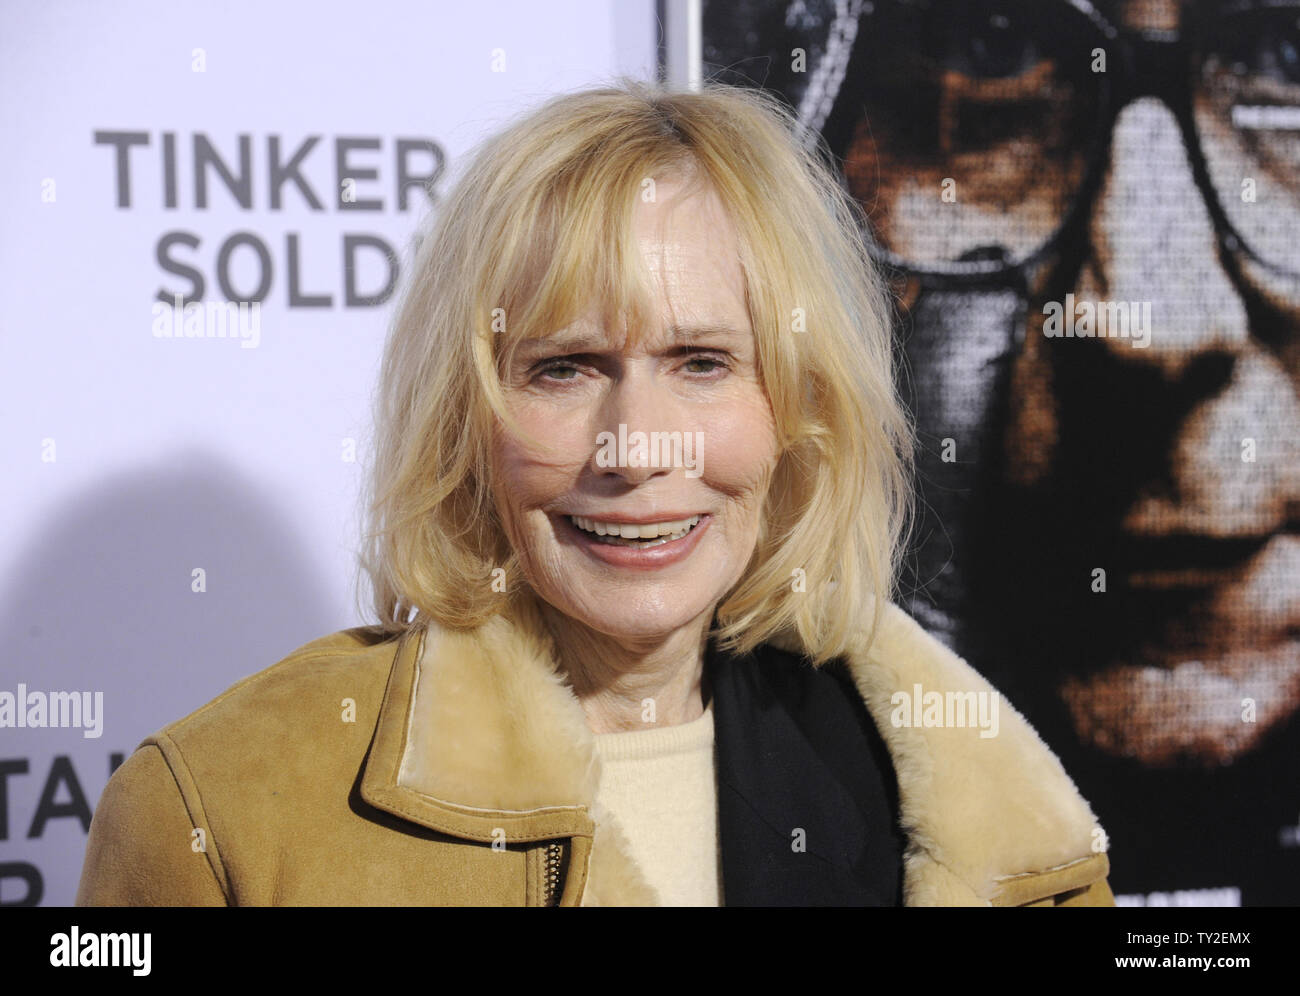 Actress Sally Kellerman attends the premiere of 'Tinker Tailor Soldier Spy' held at the Arclight Theatre in the Hollywood section of Los Angeles on December 6, 2011.      UPI/Phil McCarten Stock Photo